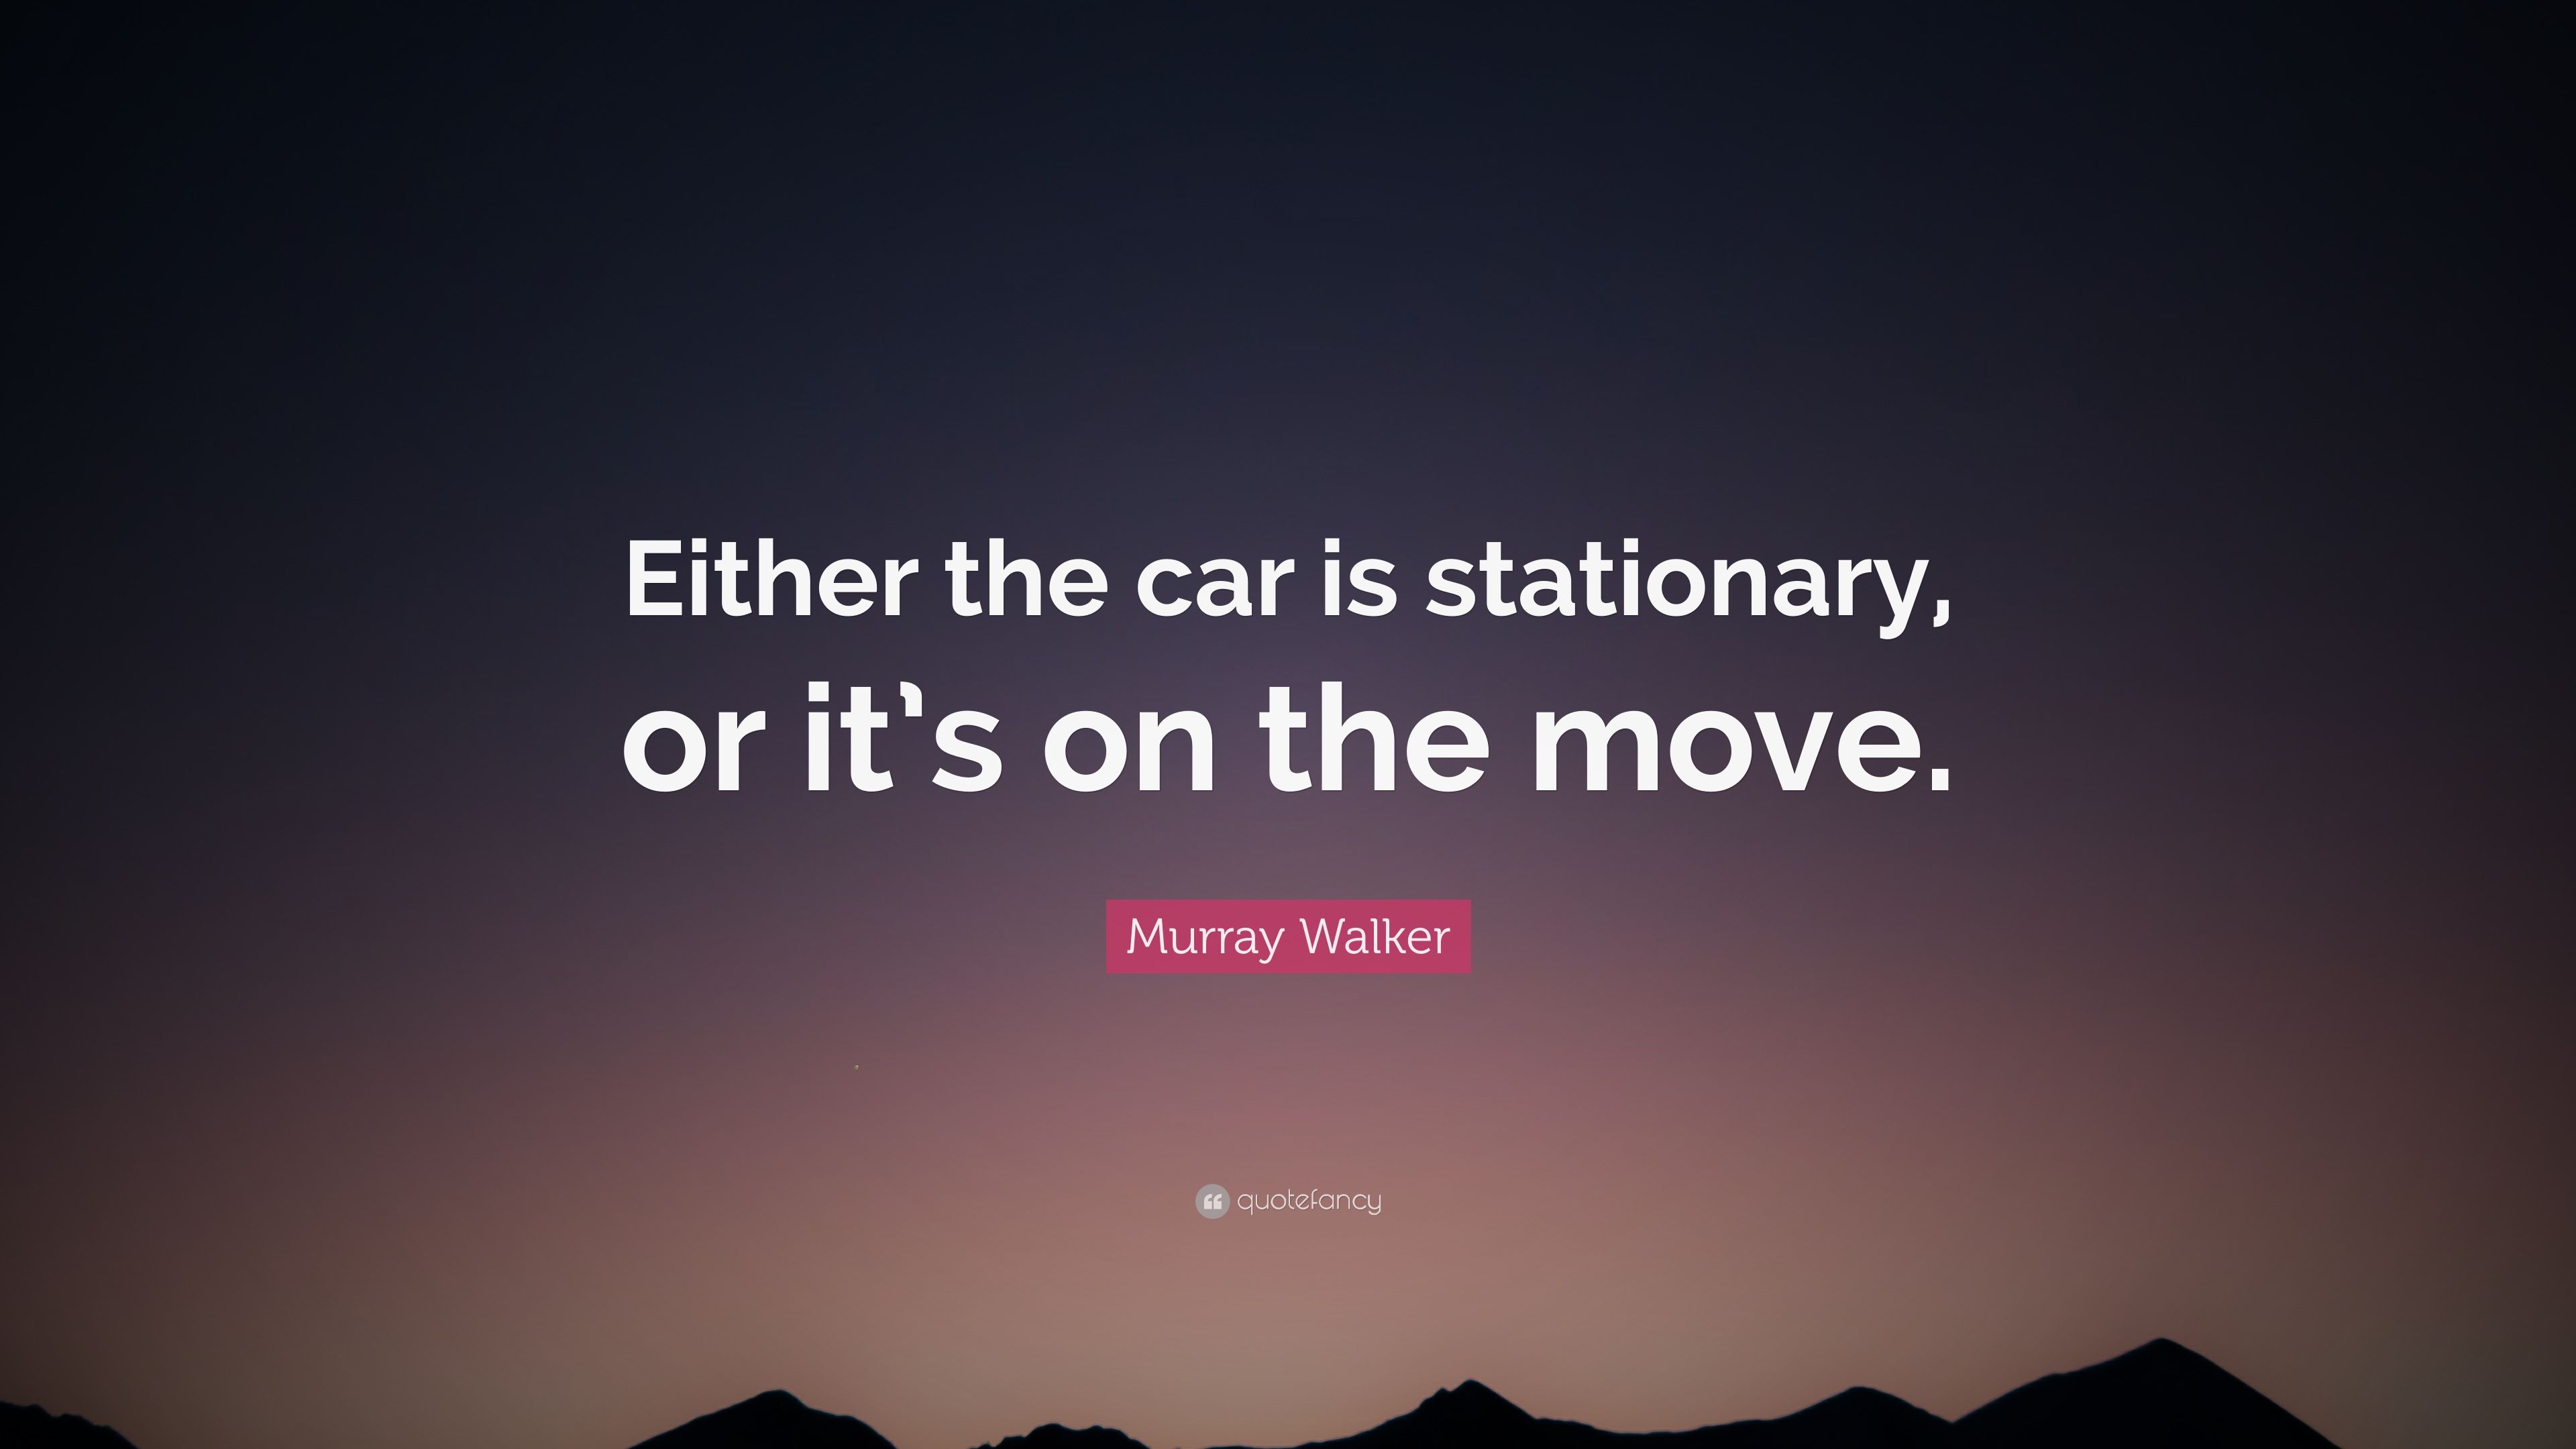 Murray Walker Quote: “Either the car is stationary, or it's on